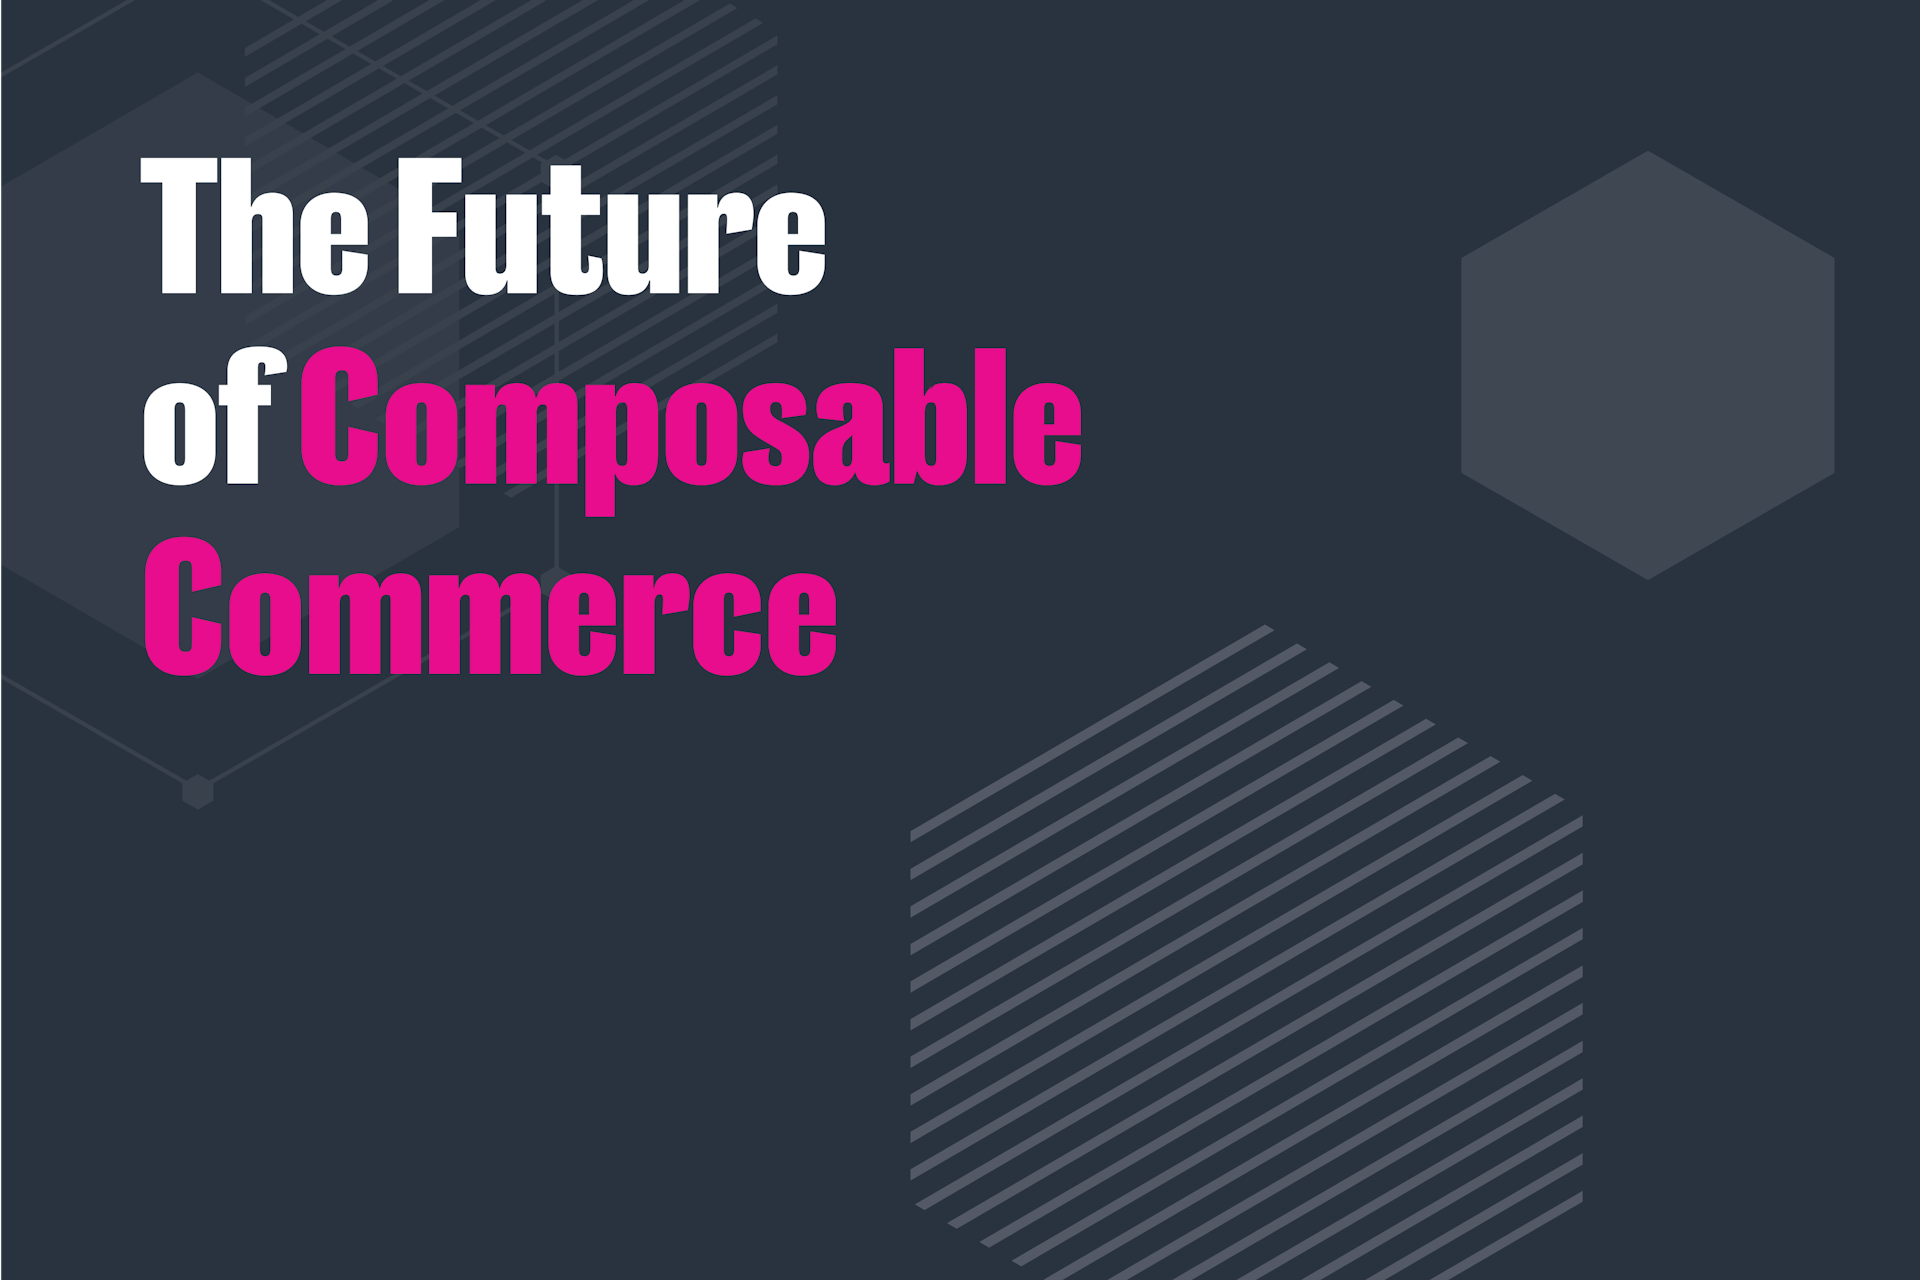 The Future of Composable Commerce